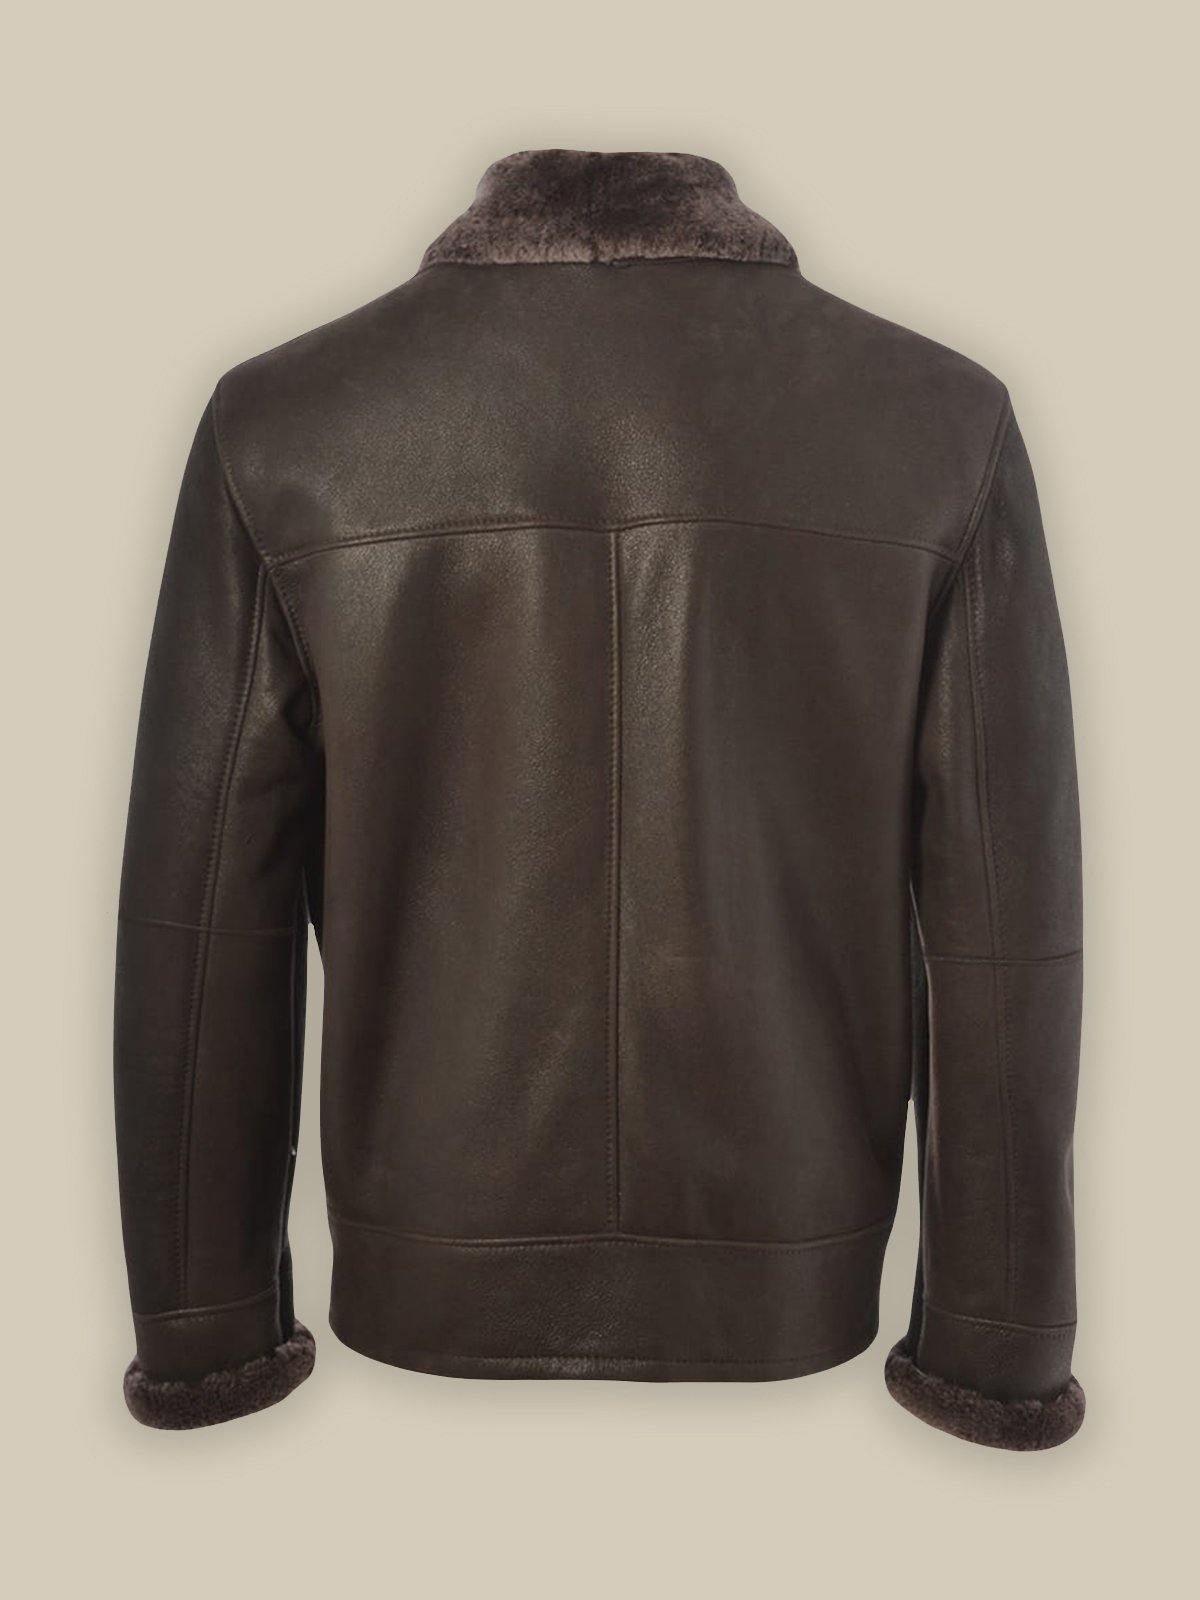 Men's Brown Shearling Bomber Leather Jacket